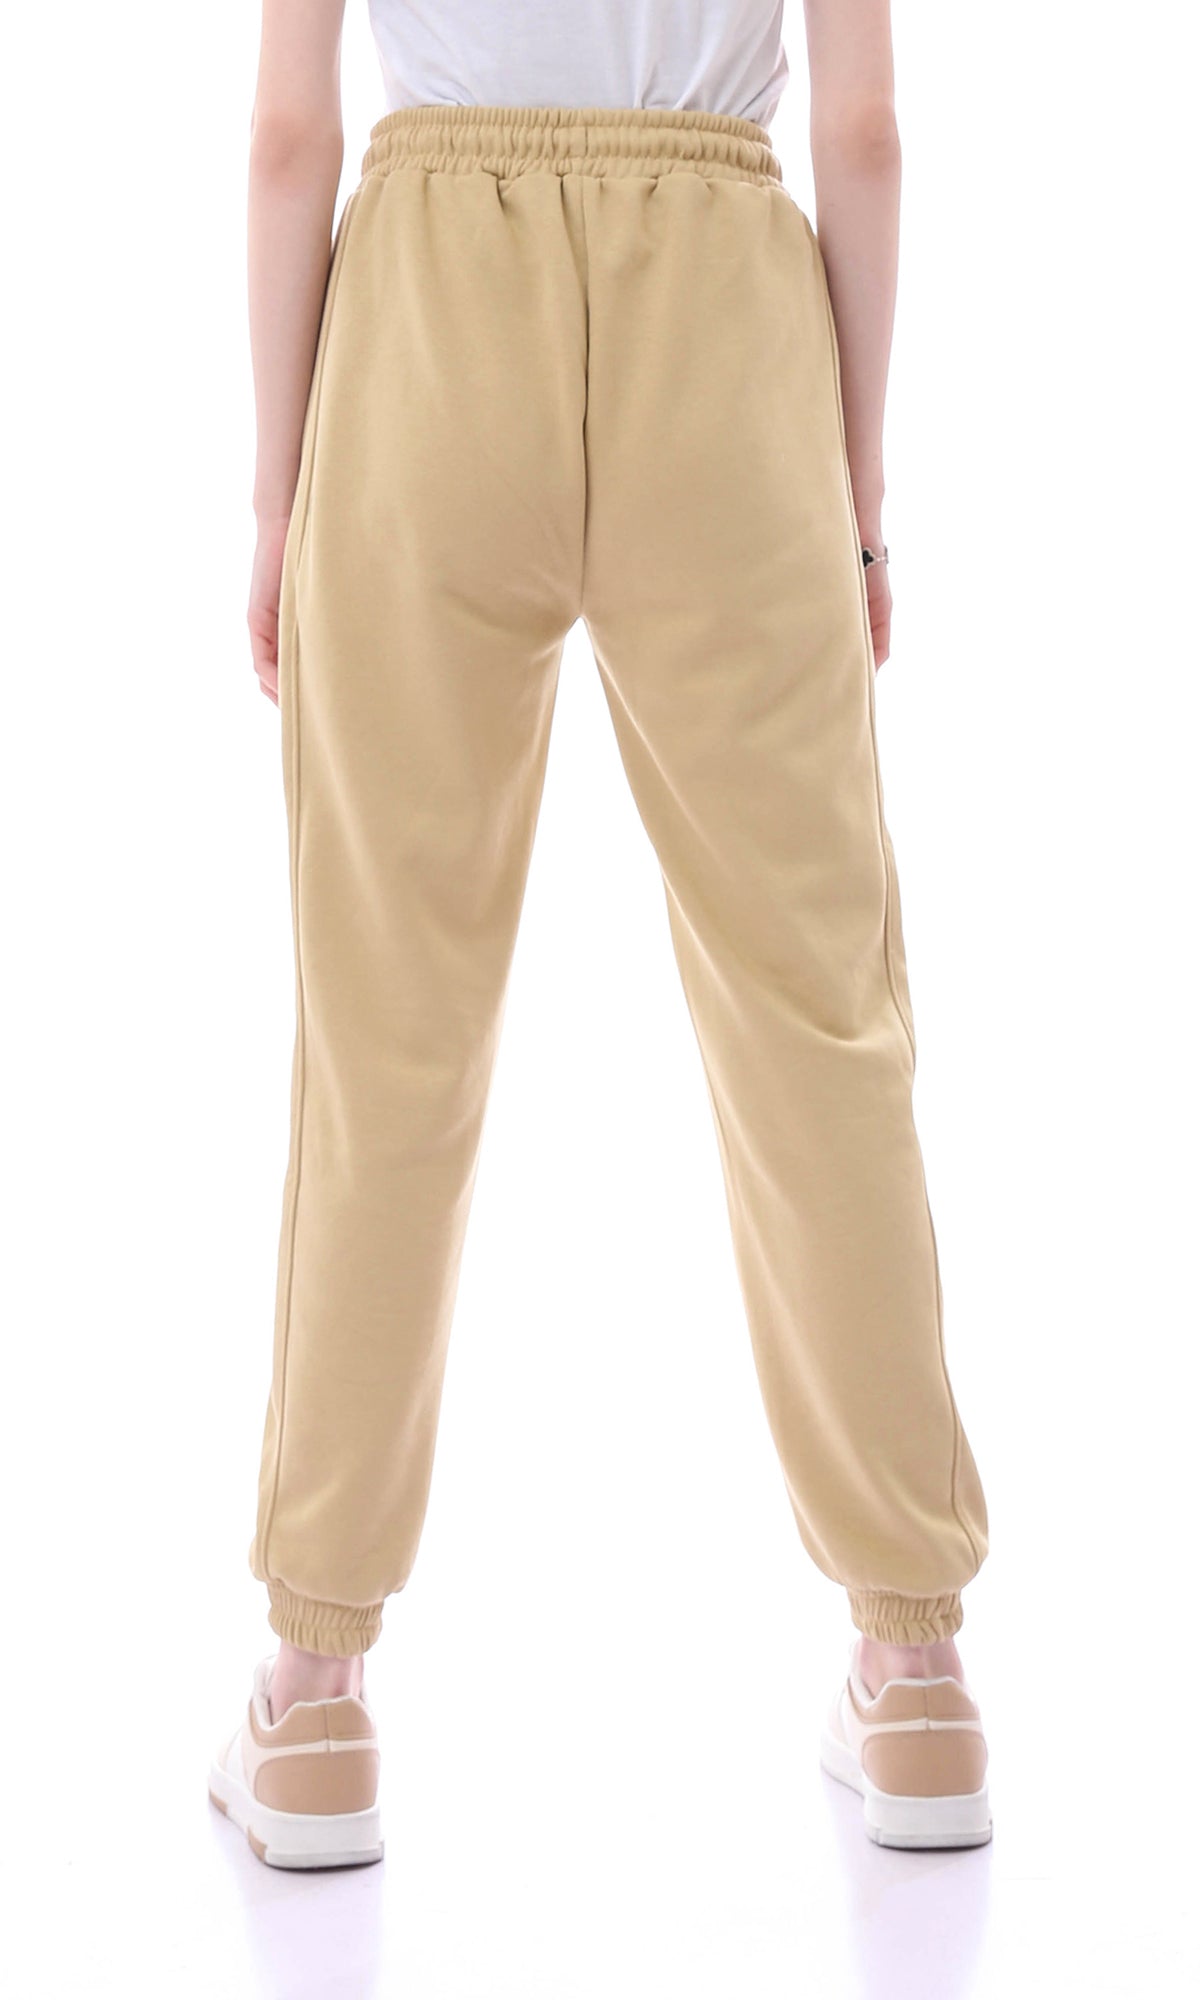 O165842 Dark Beige Solid Cotton Sweatpants With Side Pockets